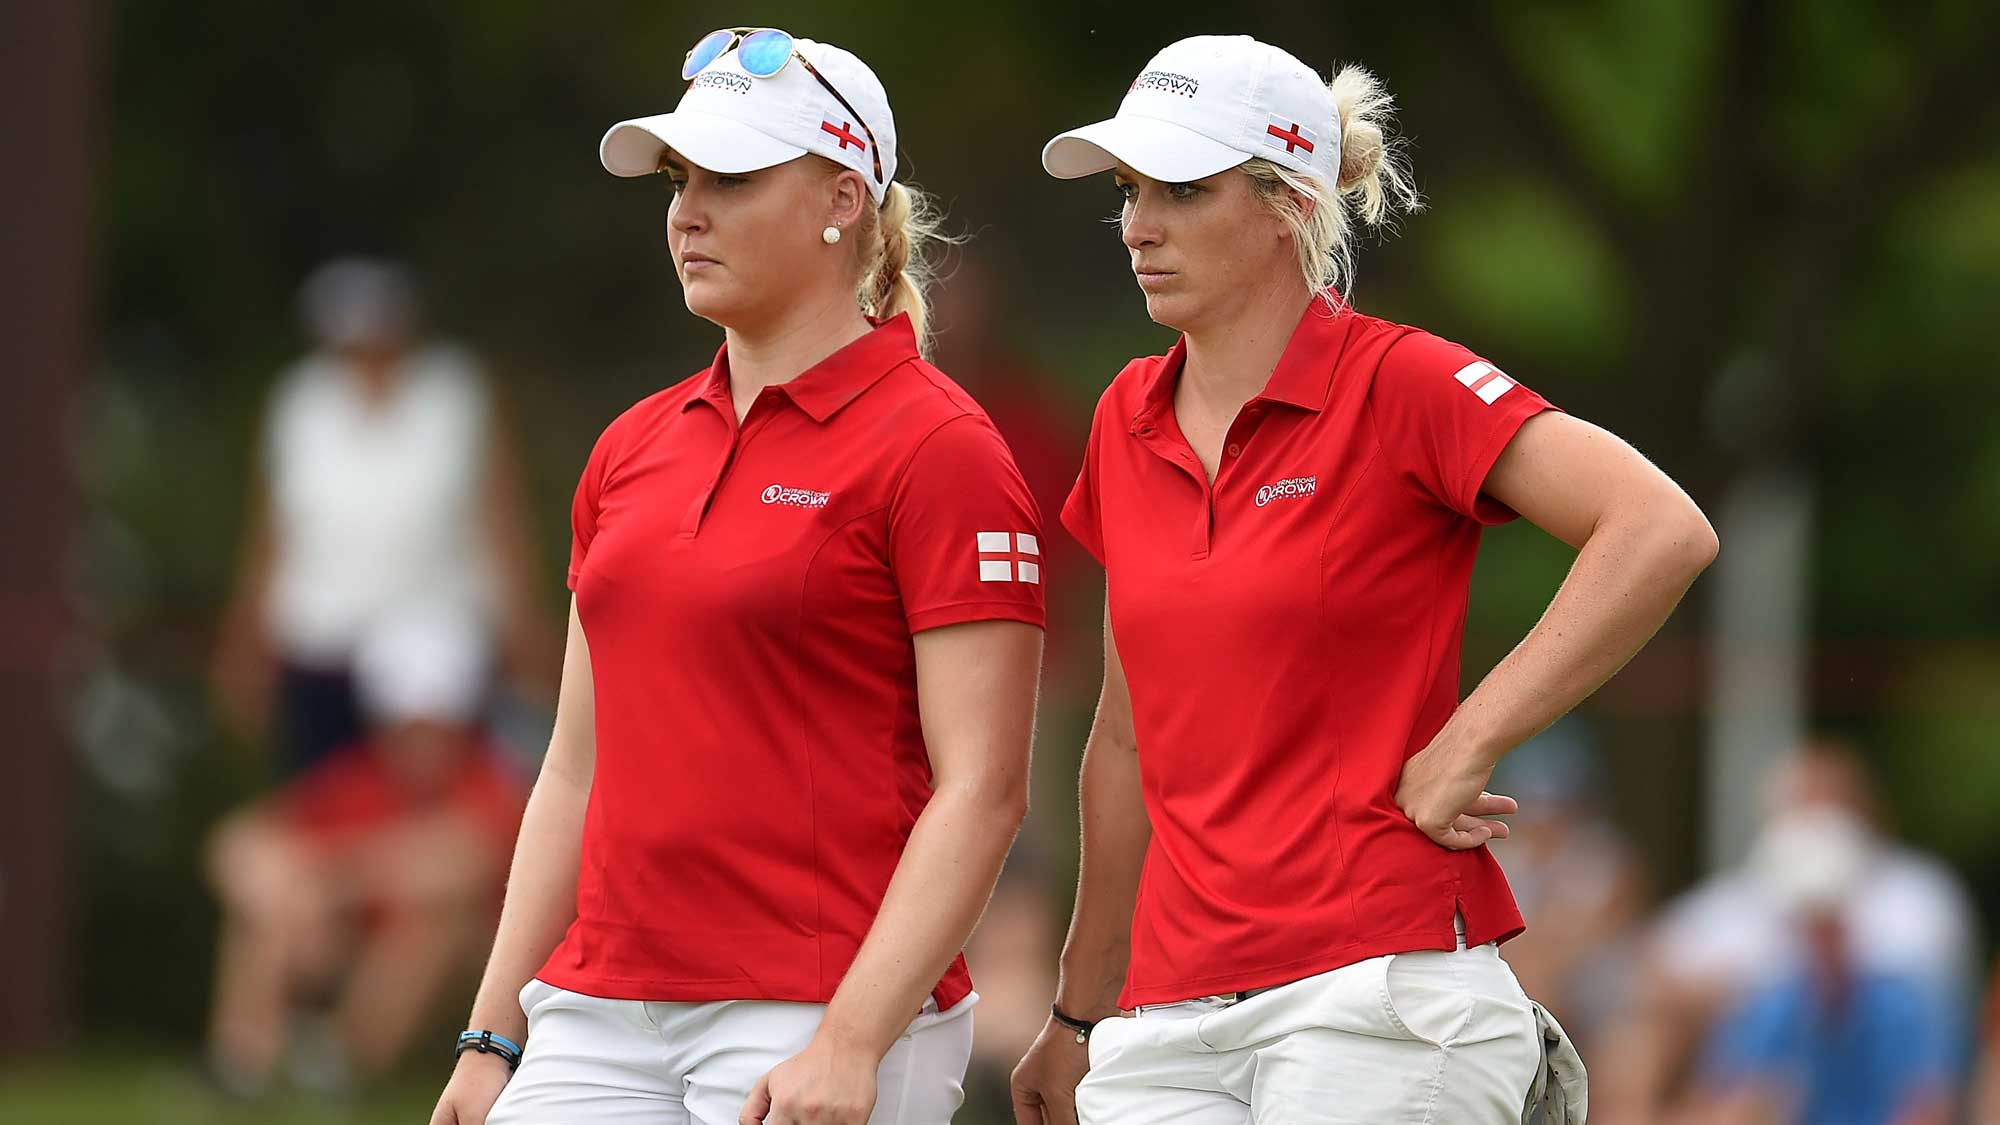 Charley Hull and Melissa Reid of England wait on the 16th green during the four-ball session of the 2016 UL International Crown